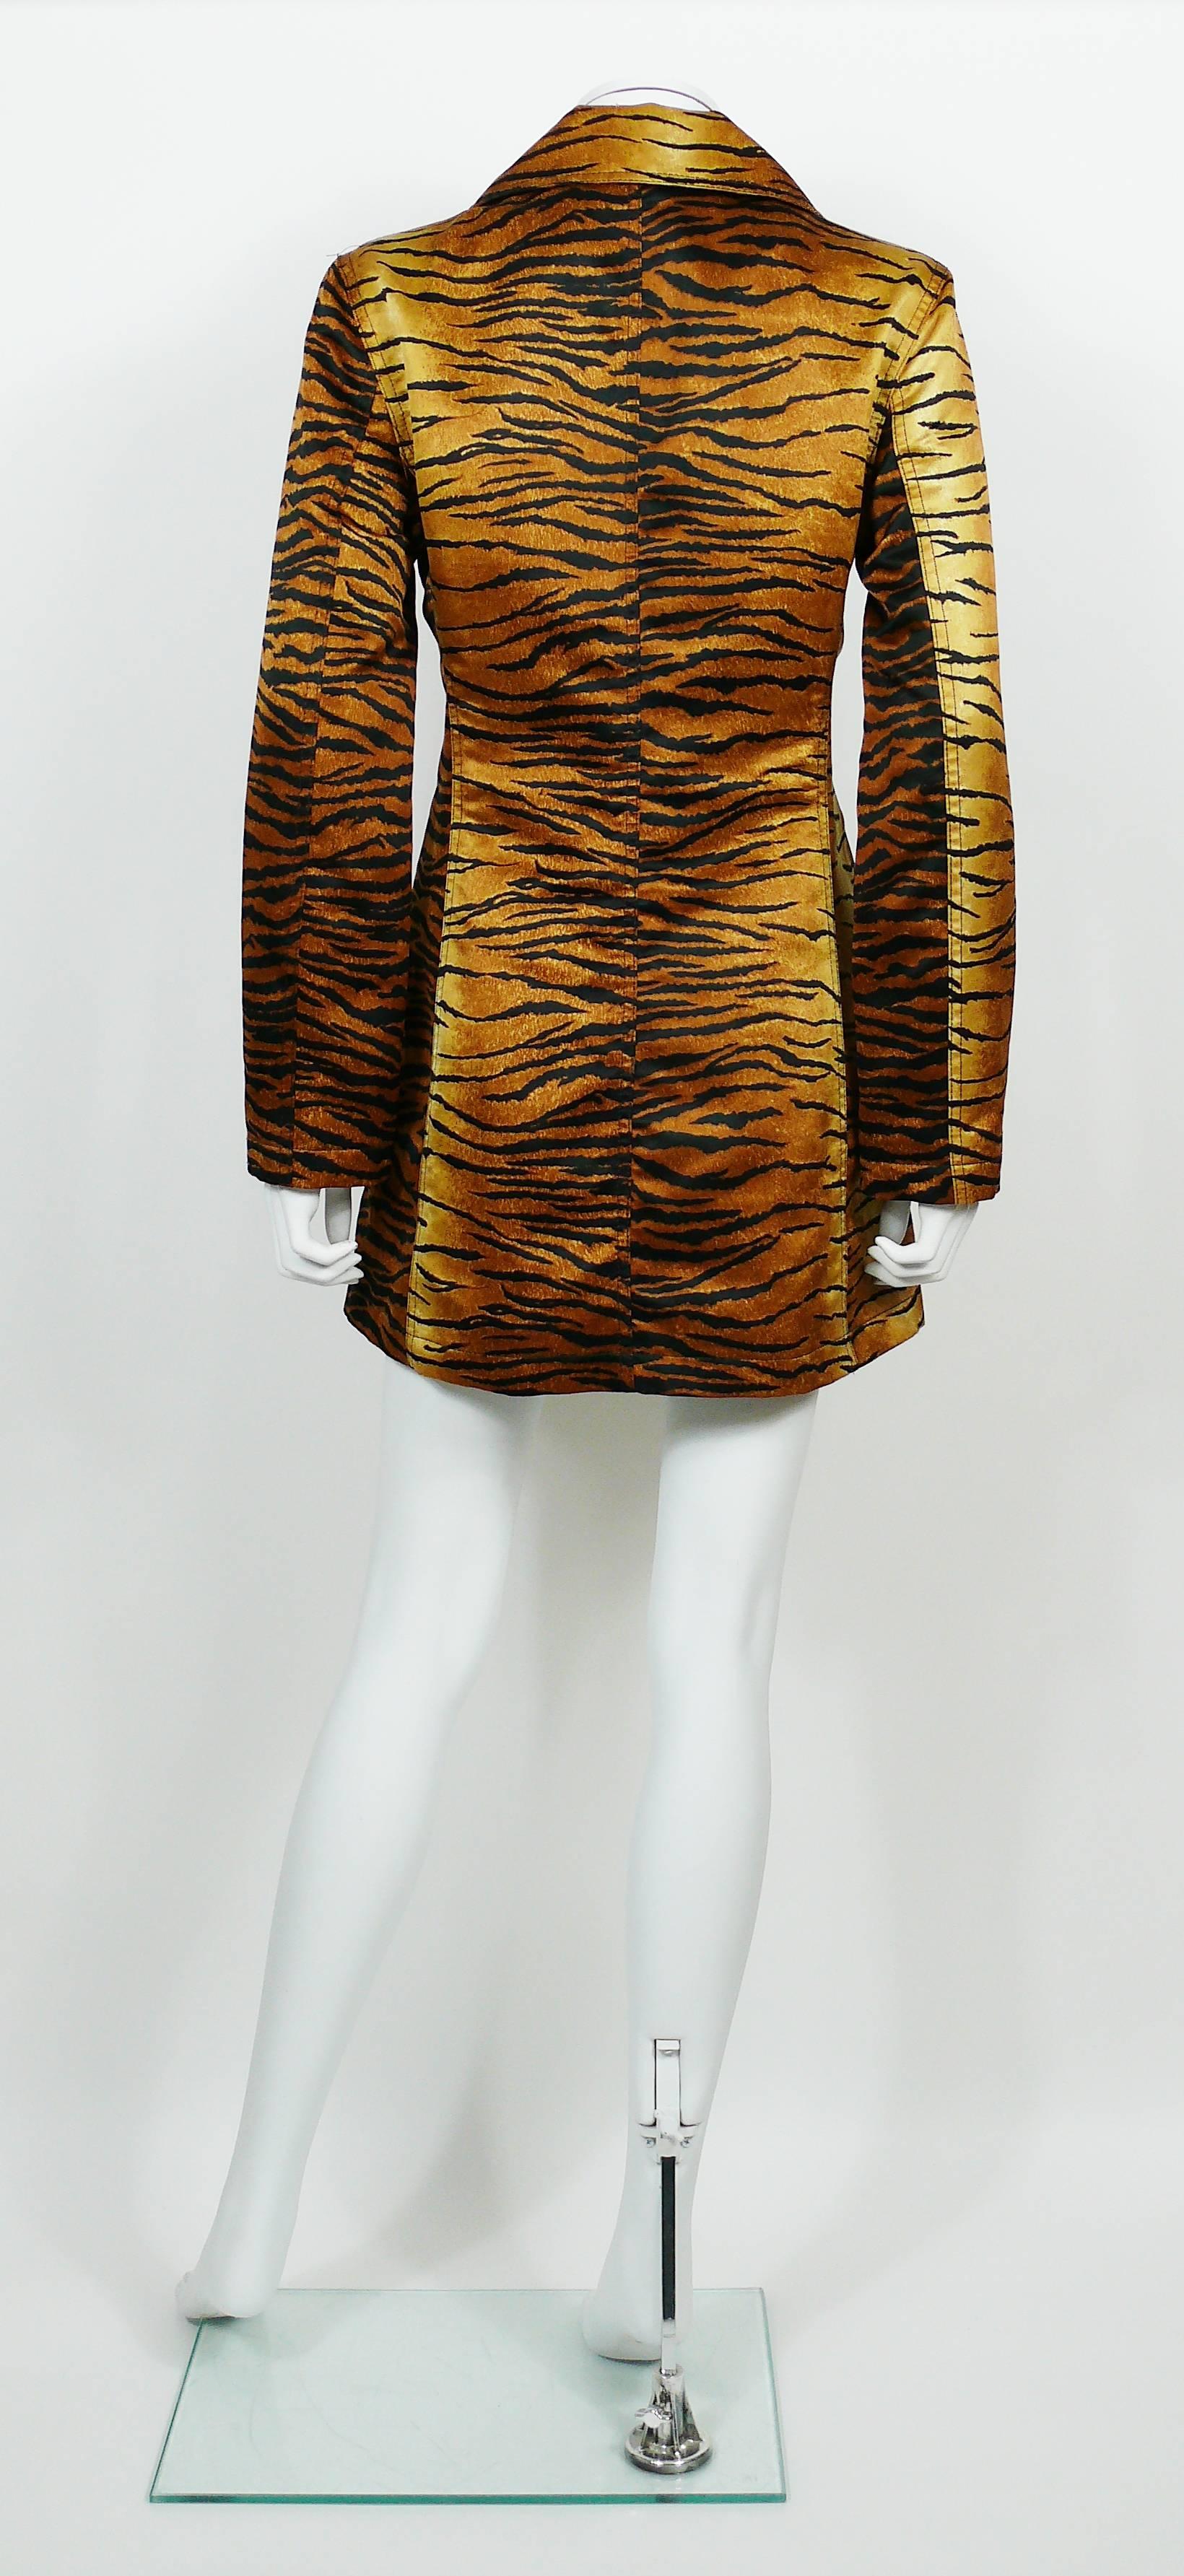 Moschino Jeans Vintage Tiger Print Double Breasted Long Jacket US Size 8 2